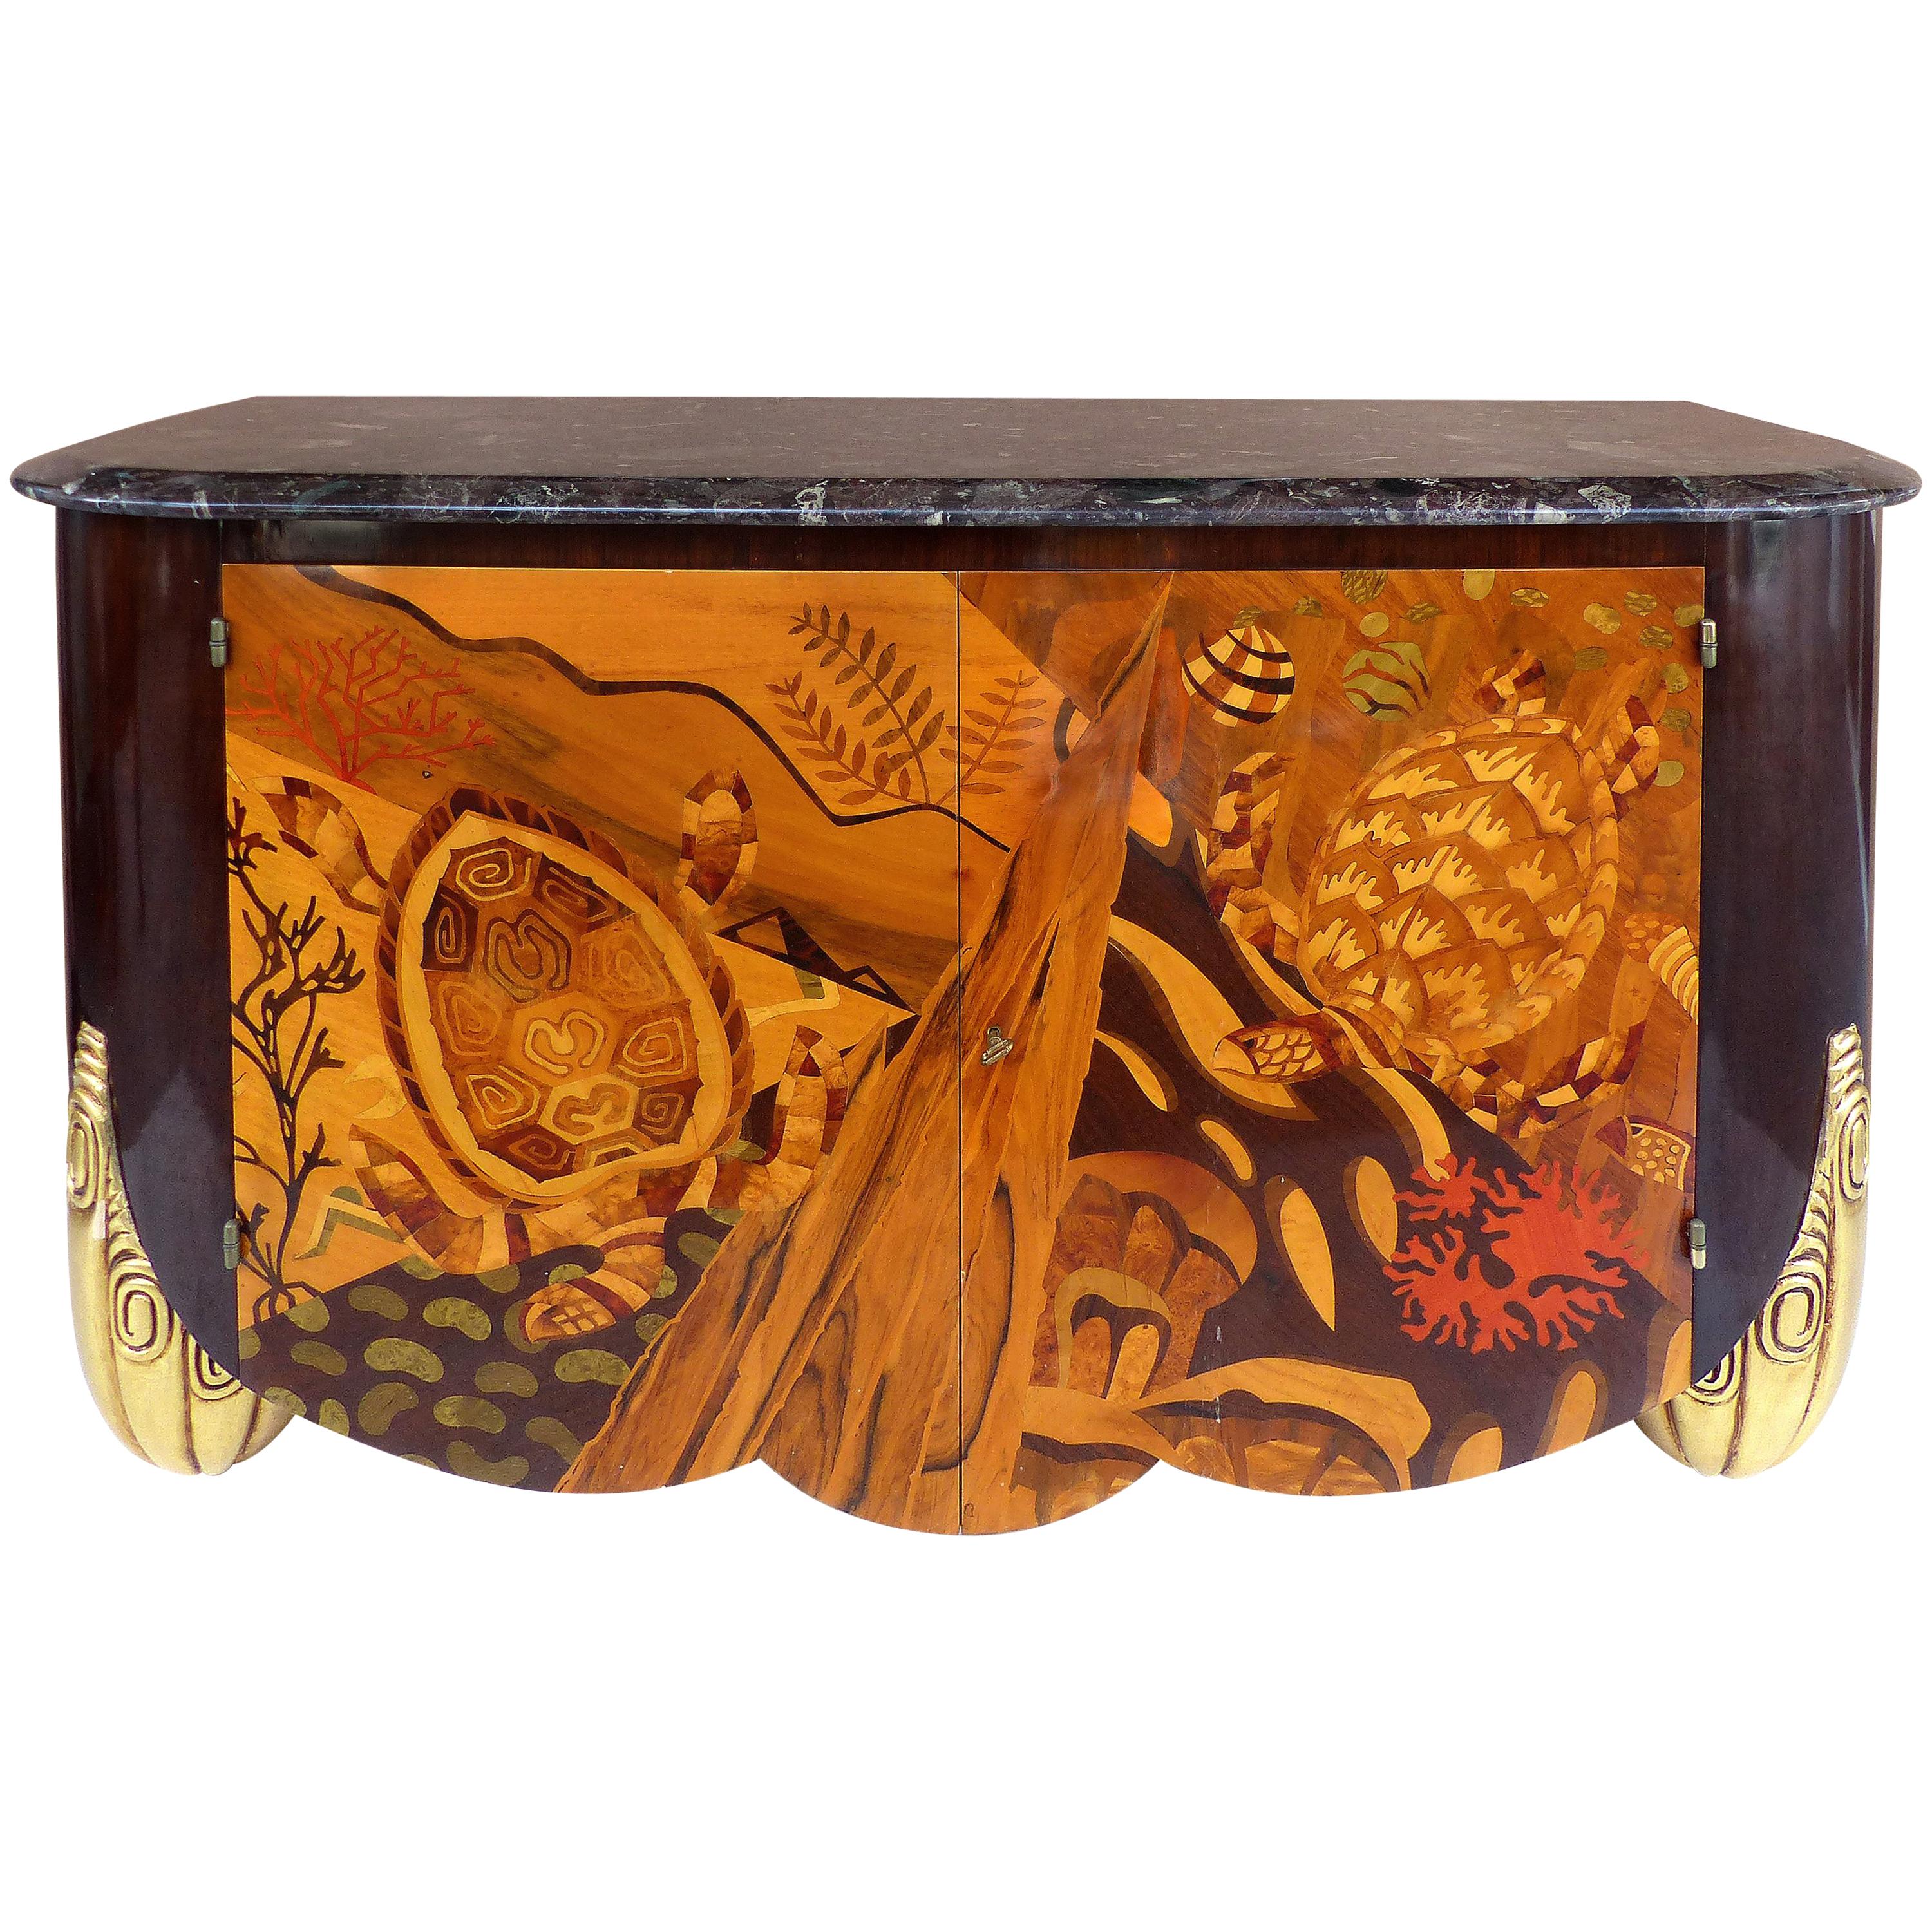 Italian Art Deco Style Marble-Top Cabinet with Marquetry of Sea Turtles